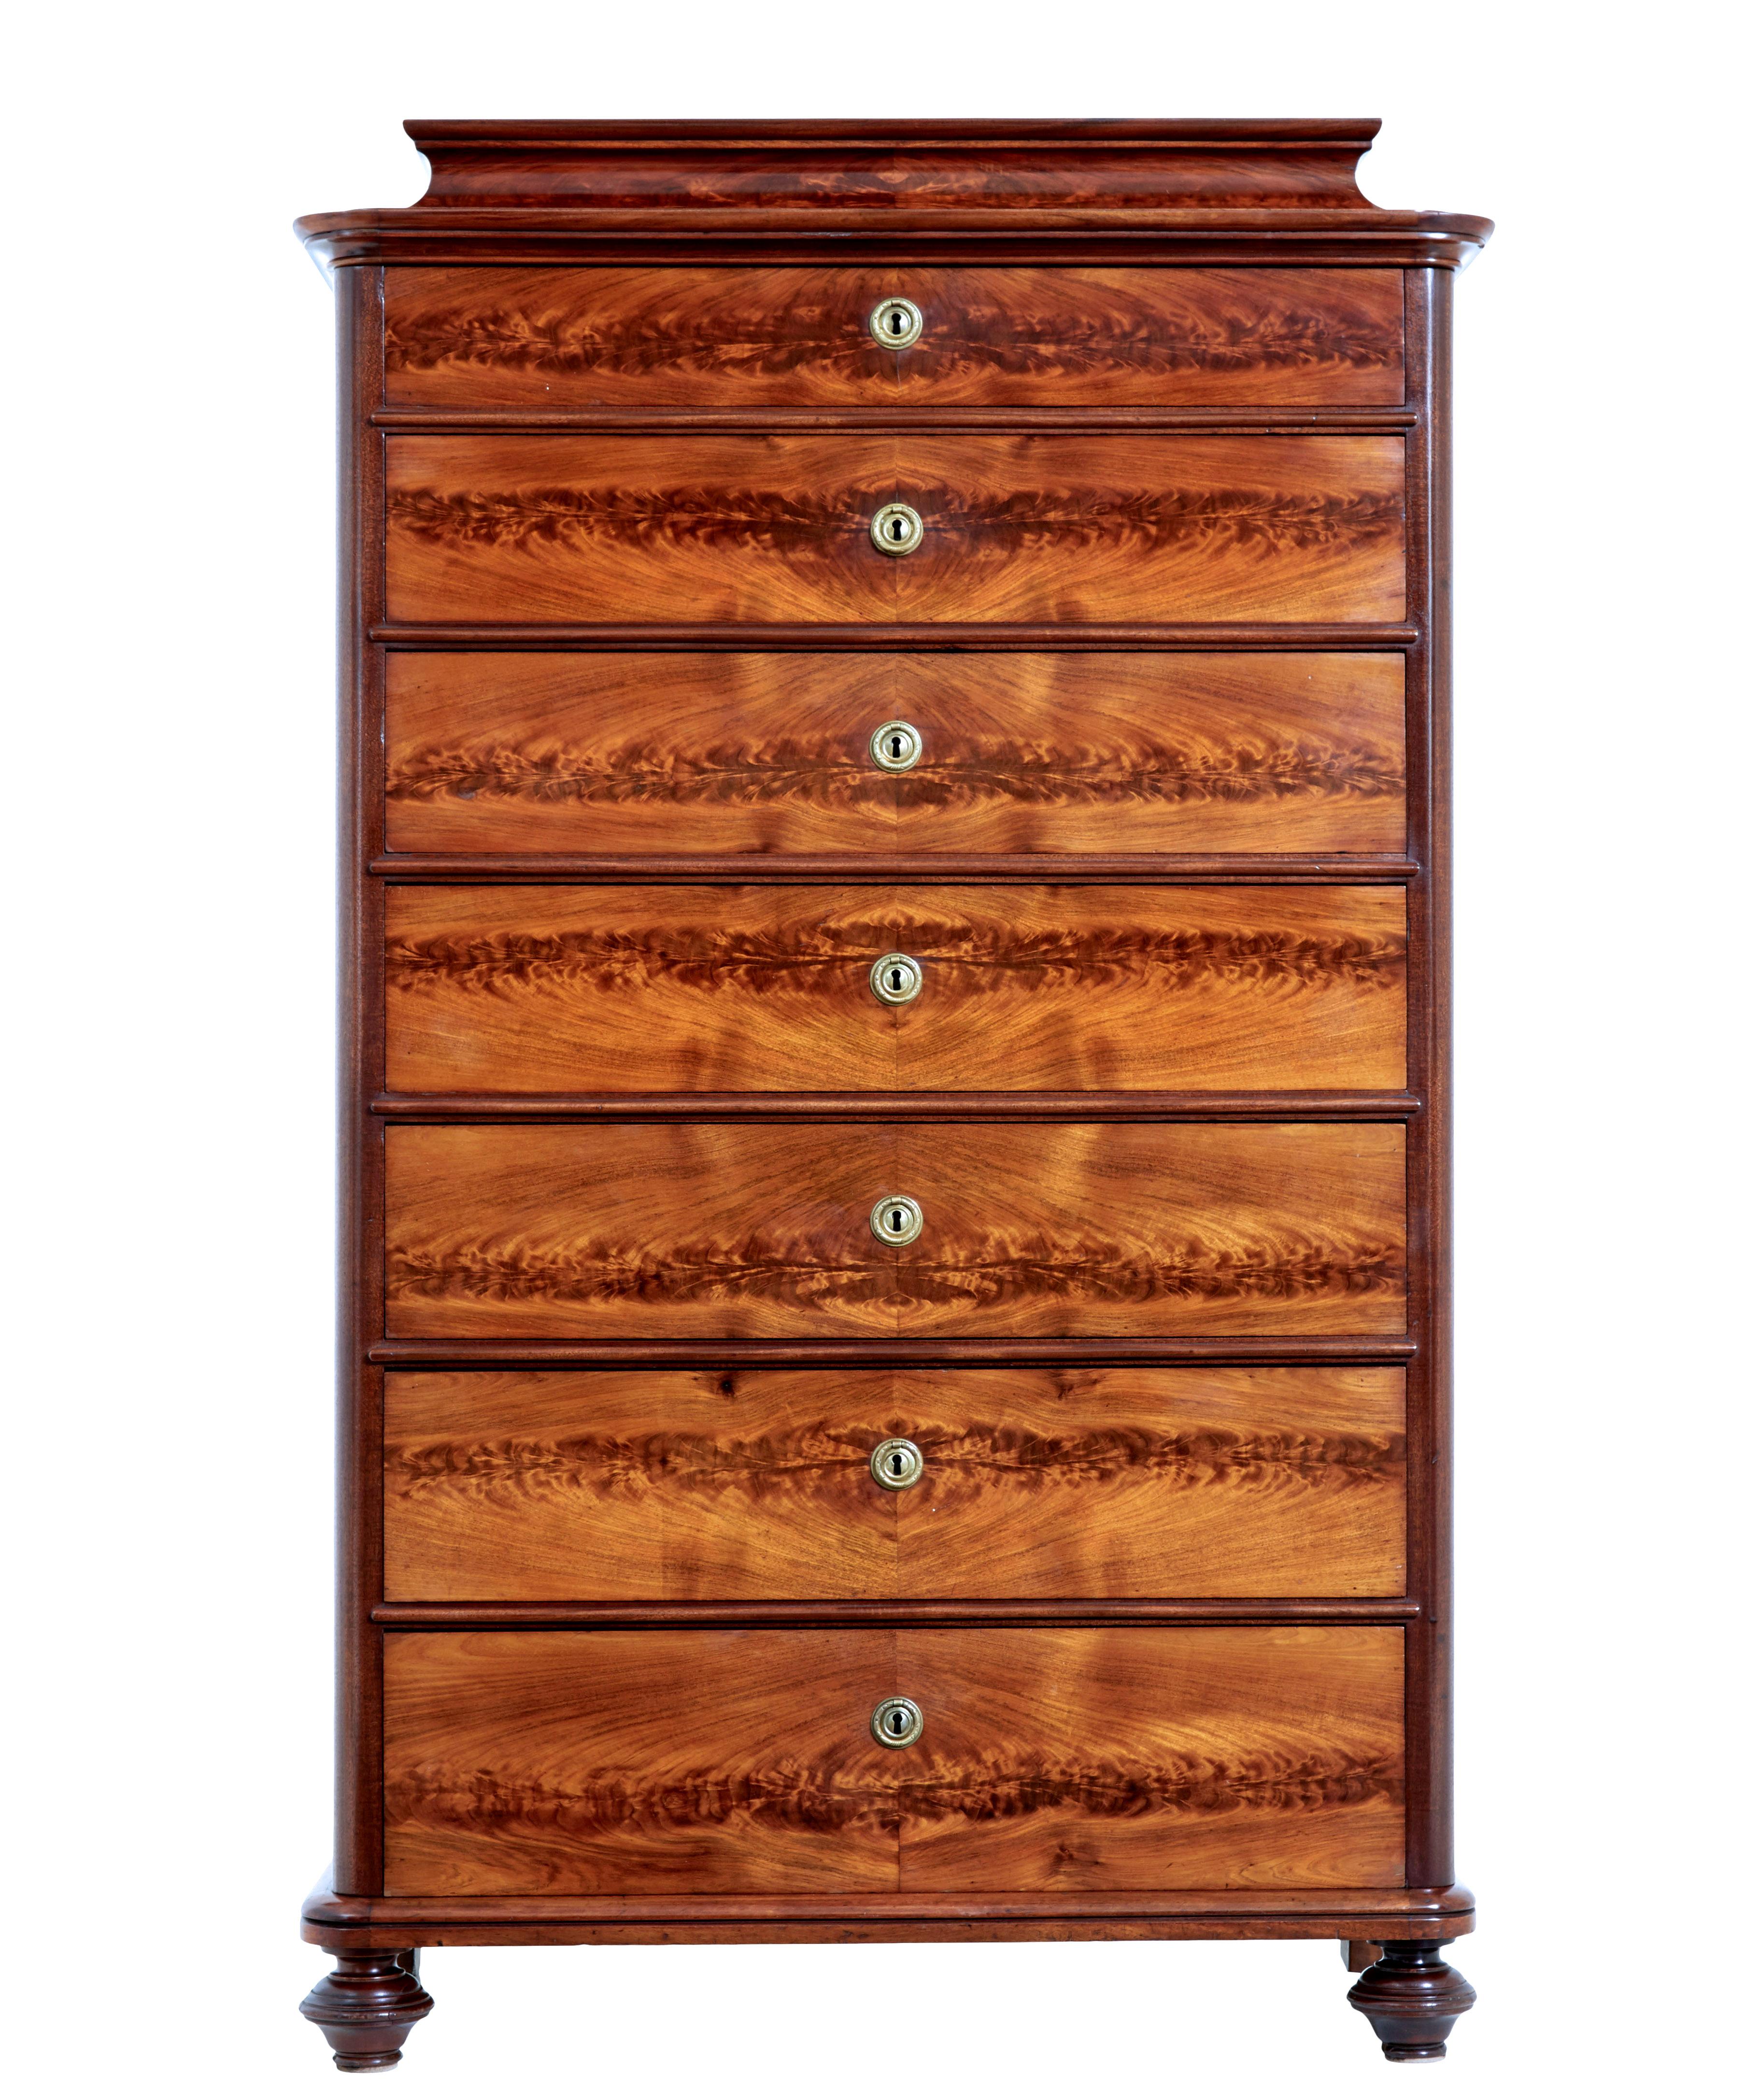 19th century flame mahogany tall chest of drawers circa 1870.

fine quality caddy top tall chest of drawers, which is also known as a seminere chest, because of the use of 7 drawers.

Made using mahogany and flame mahogany veneers. Caddy shaped